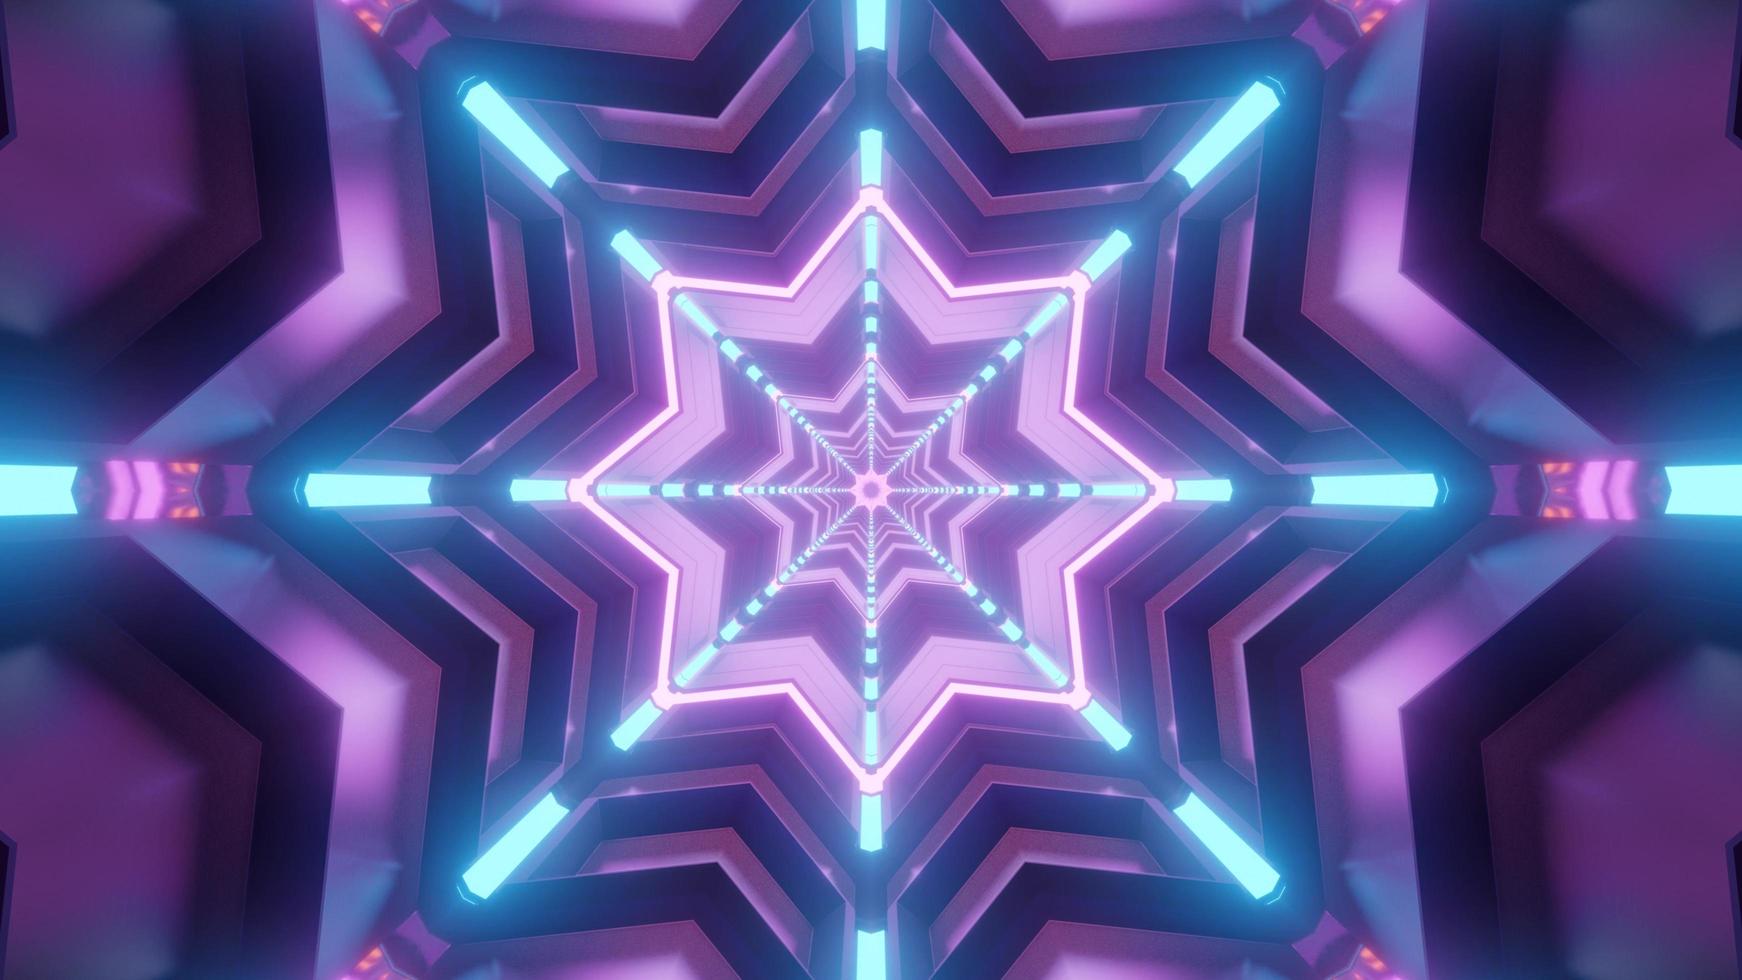 Colorful 3d kaleidoscope star illustration for background or texture photo